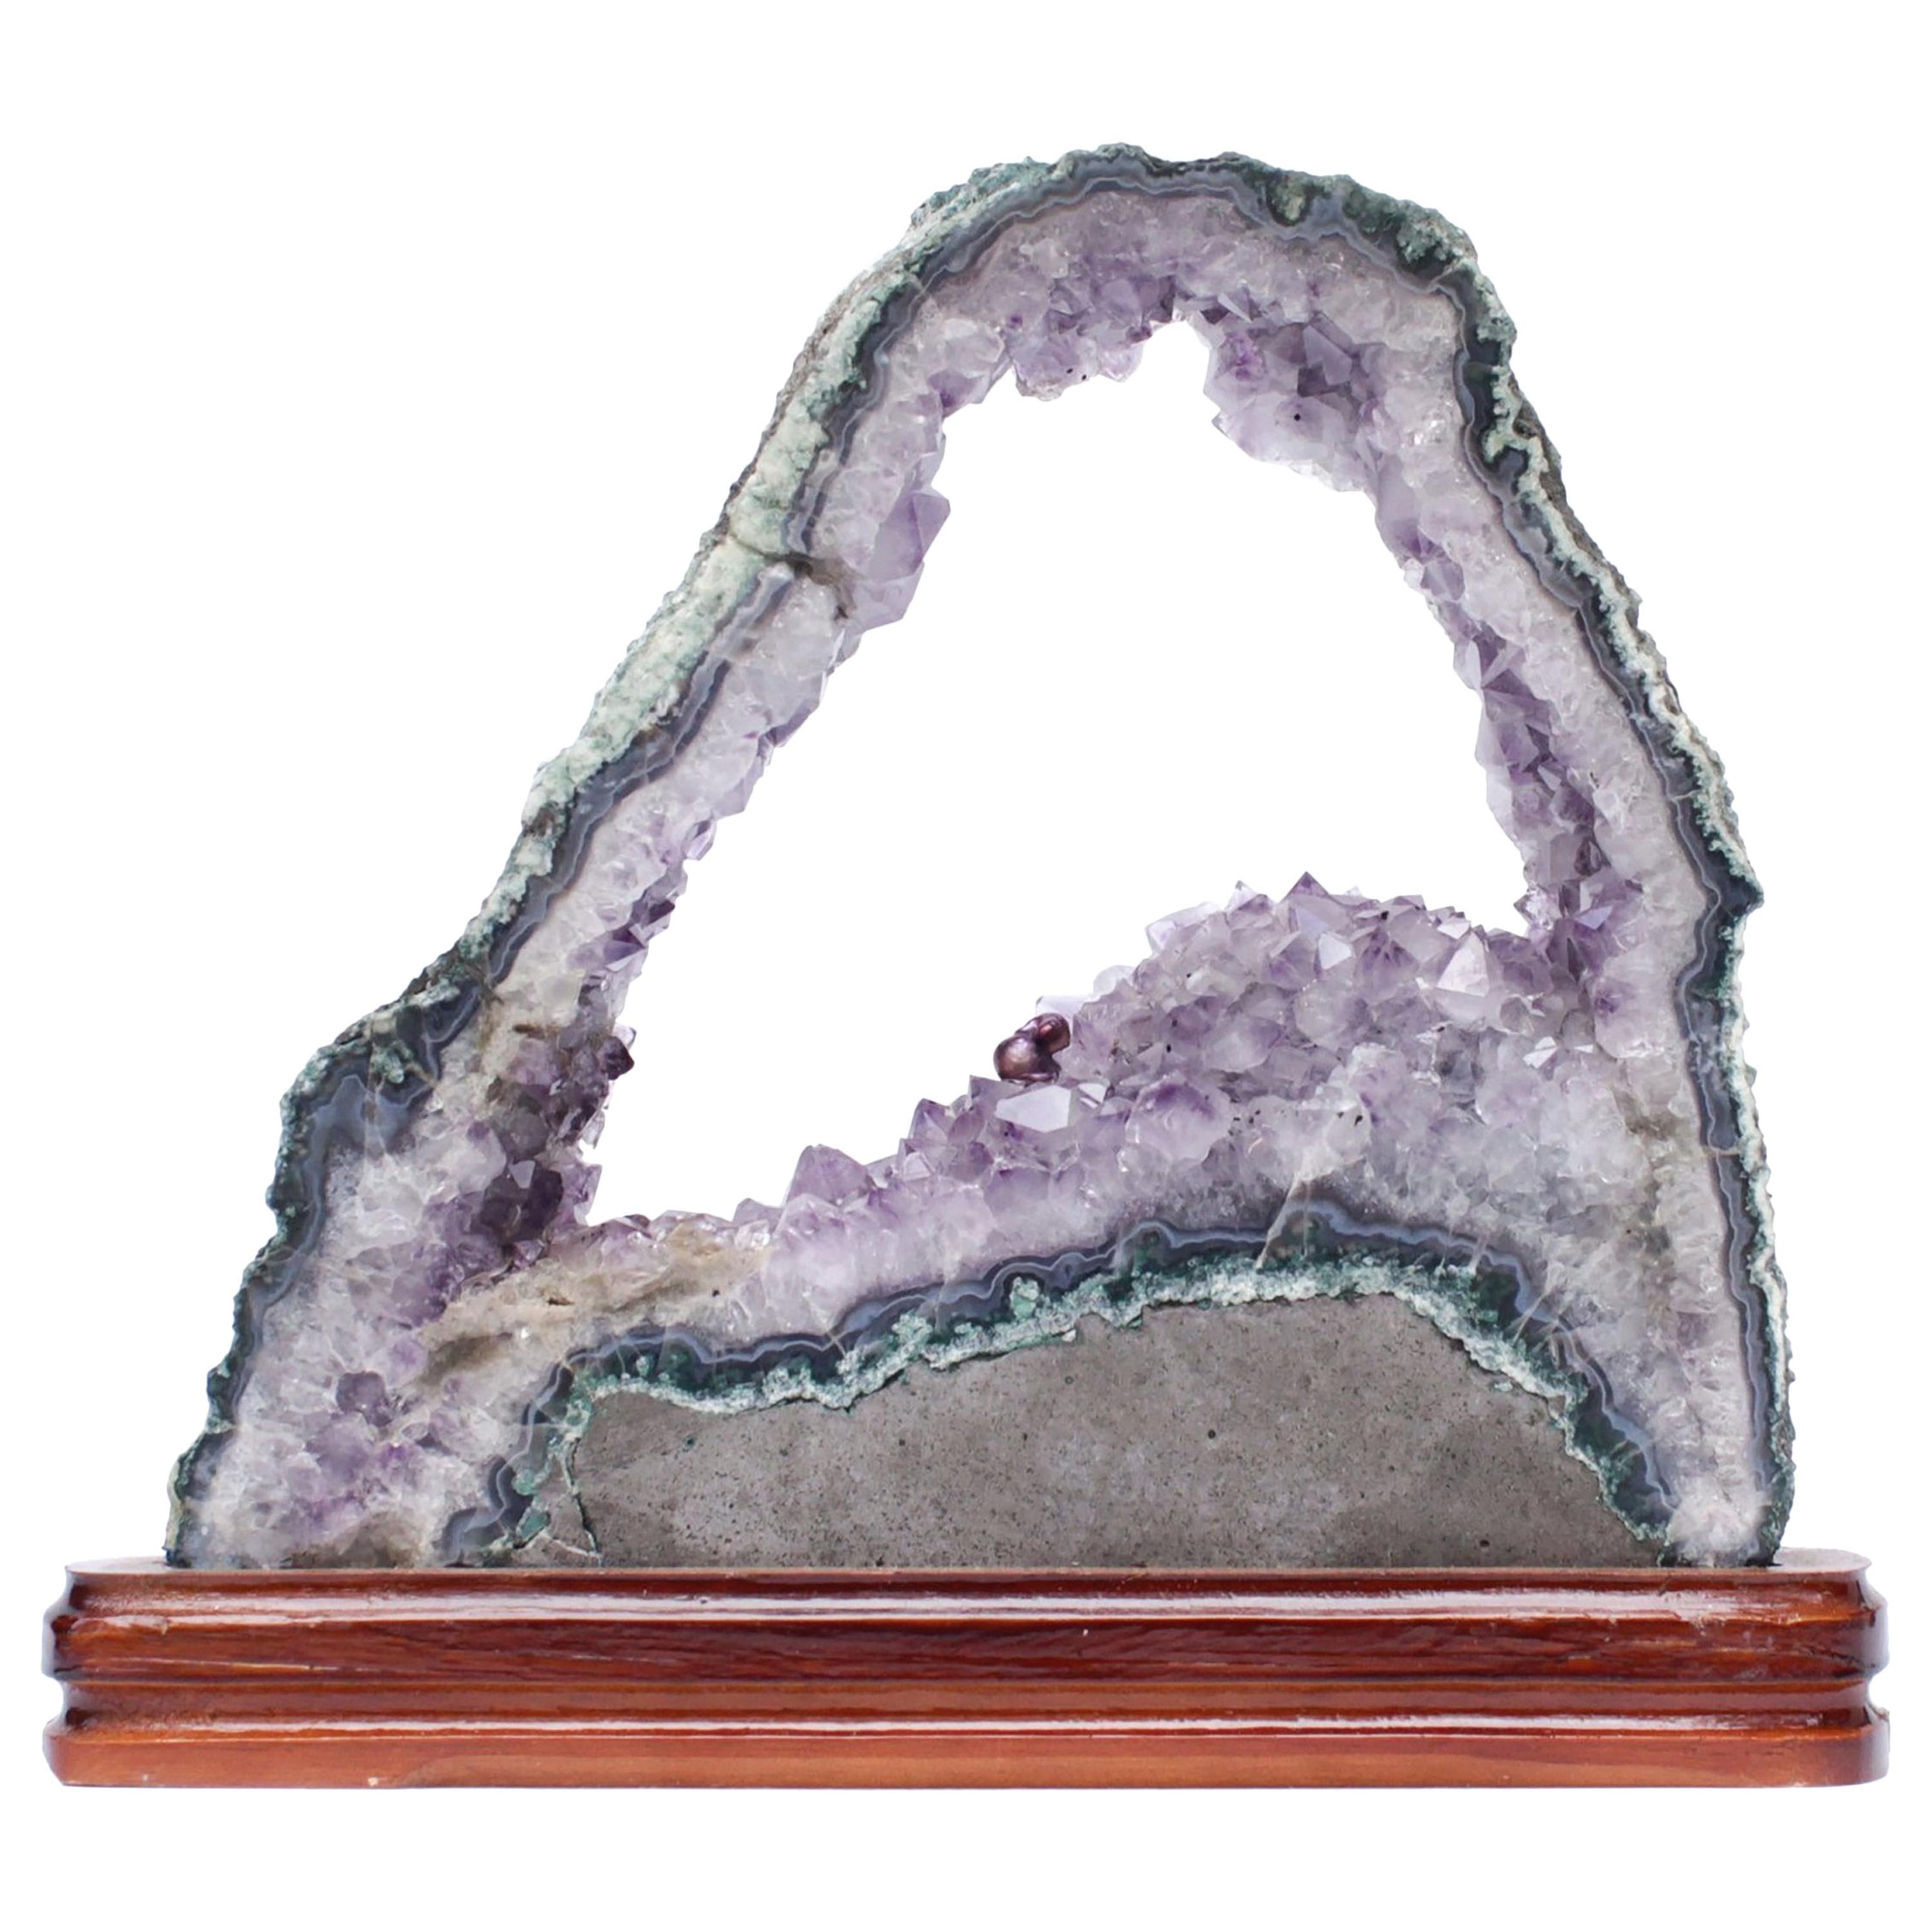 Amethyst Slice with a Baroque Pearl on a Polished Wood Base